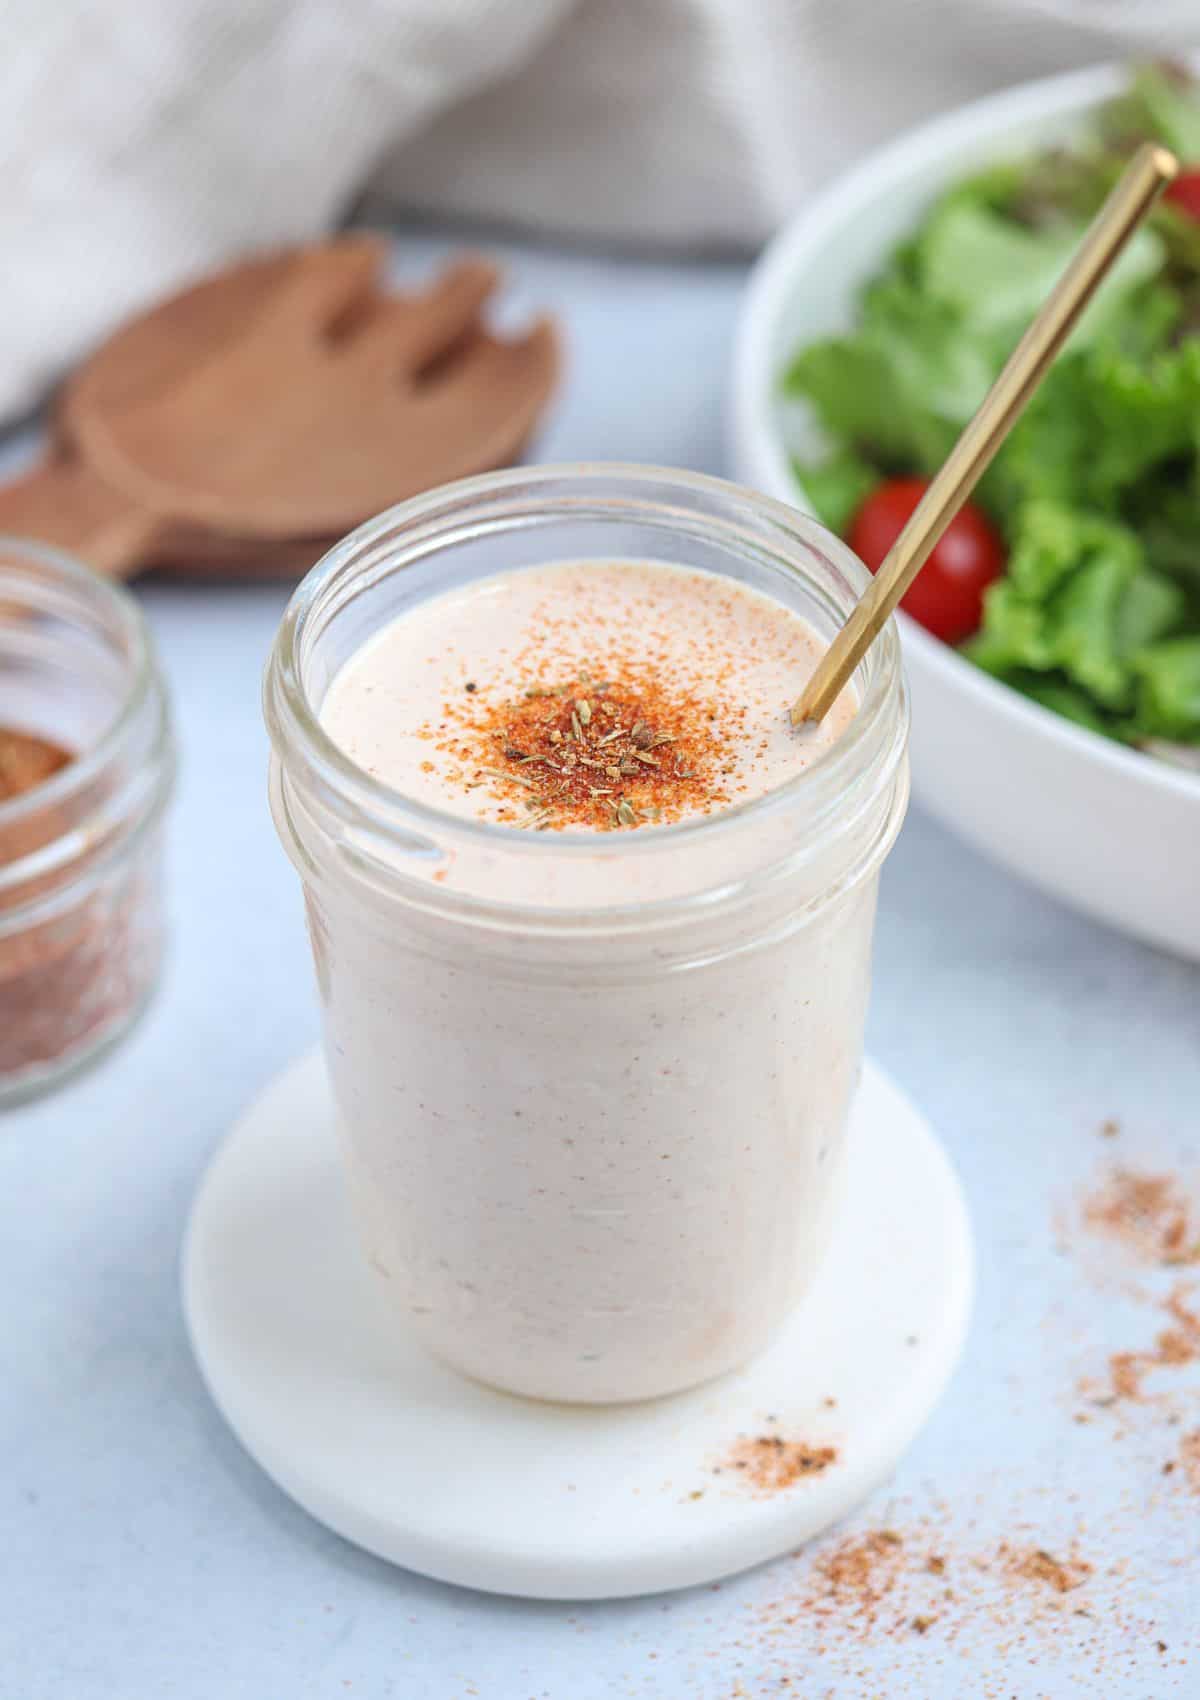 creamy cajun salad dressing in a glass jar with a gold soon inserted.